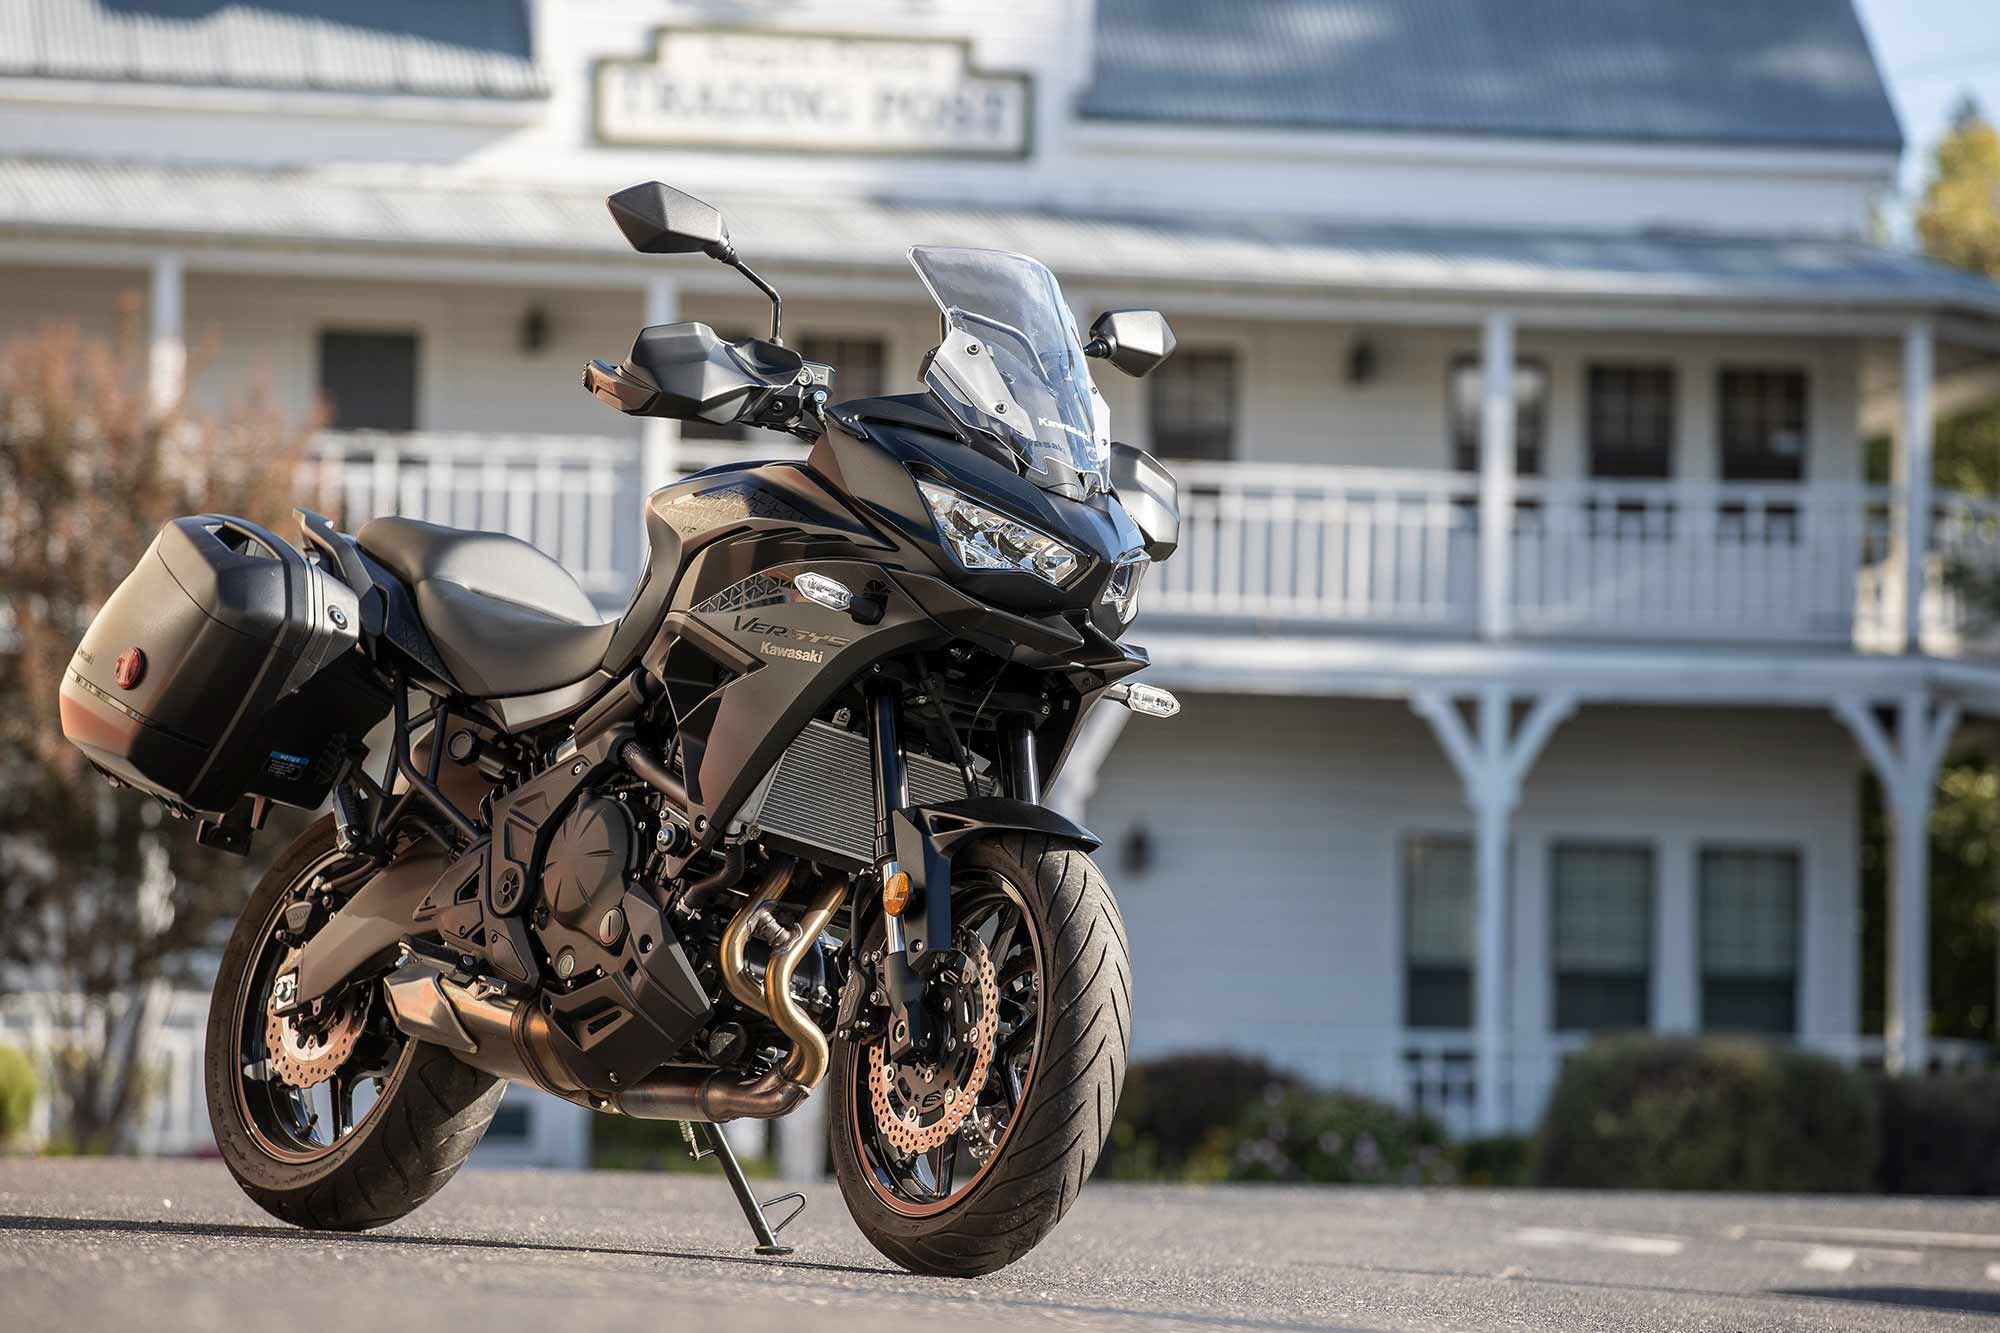 Kawasaki revised the Versys 650 for the 2022 model year. Updates included new traction control, new styling with an adjustable windscreen, and a TFT display.